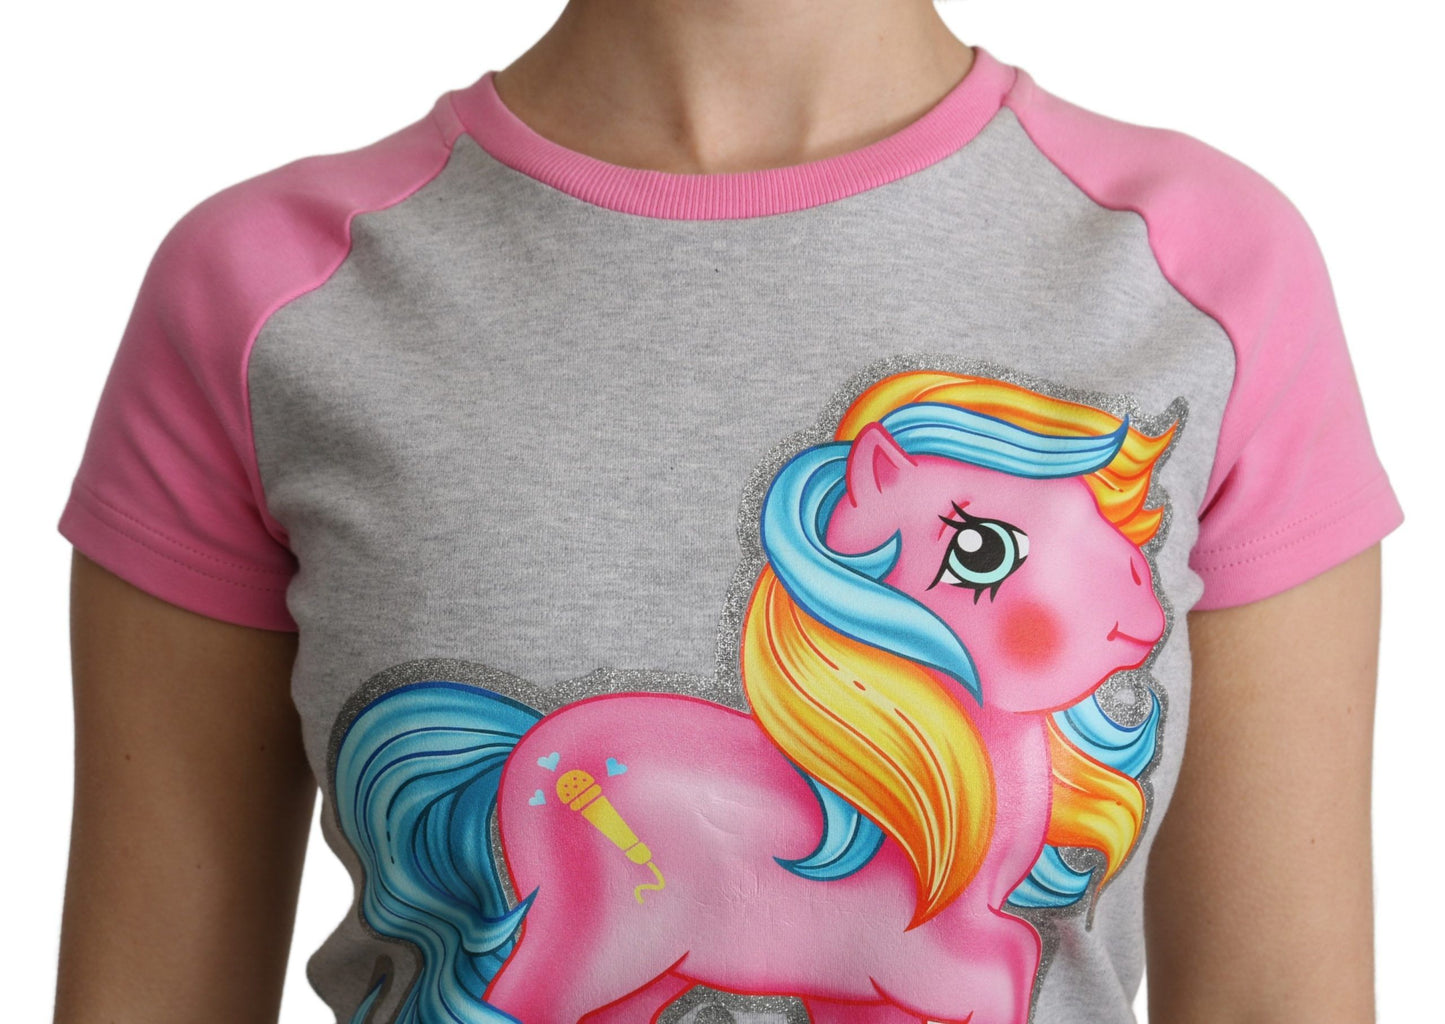 Moschino Gray and pink Cotton T-shirt My Little Pony Top